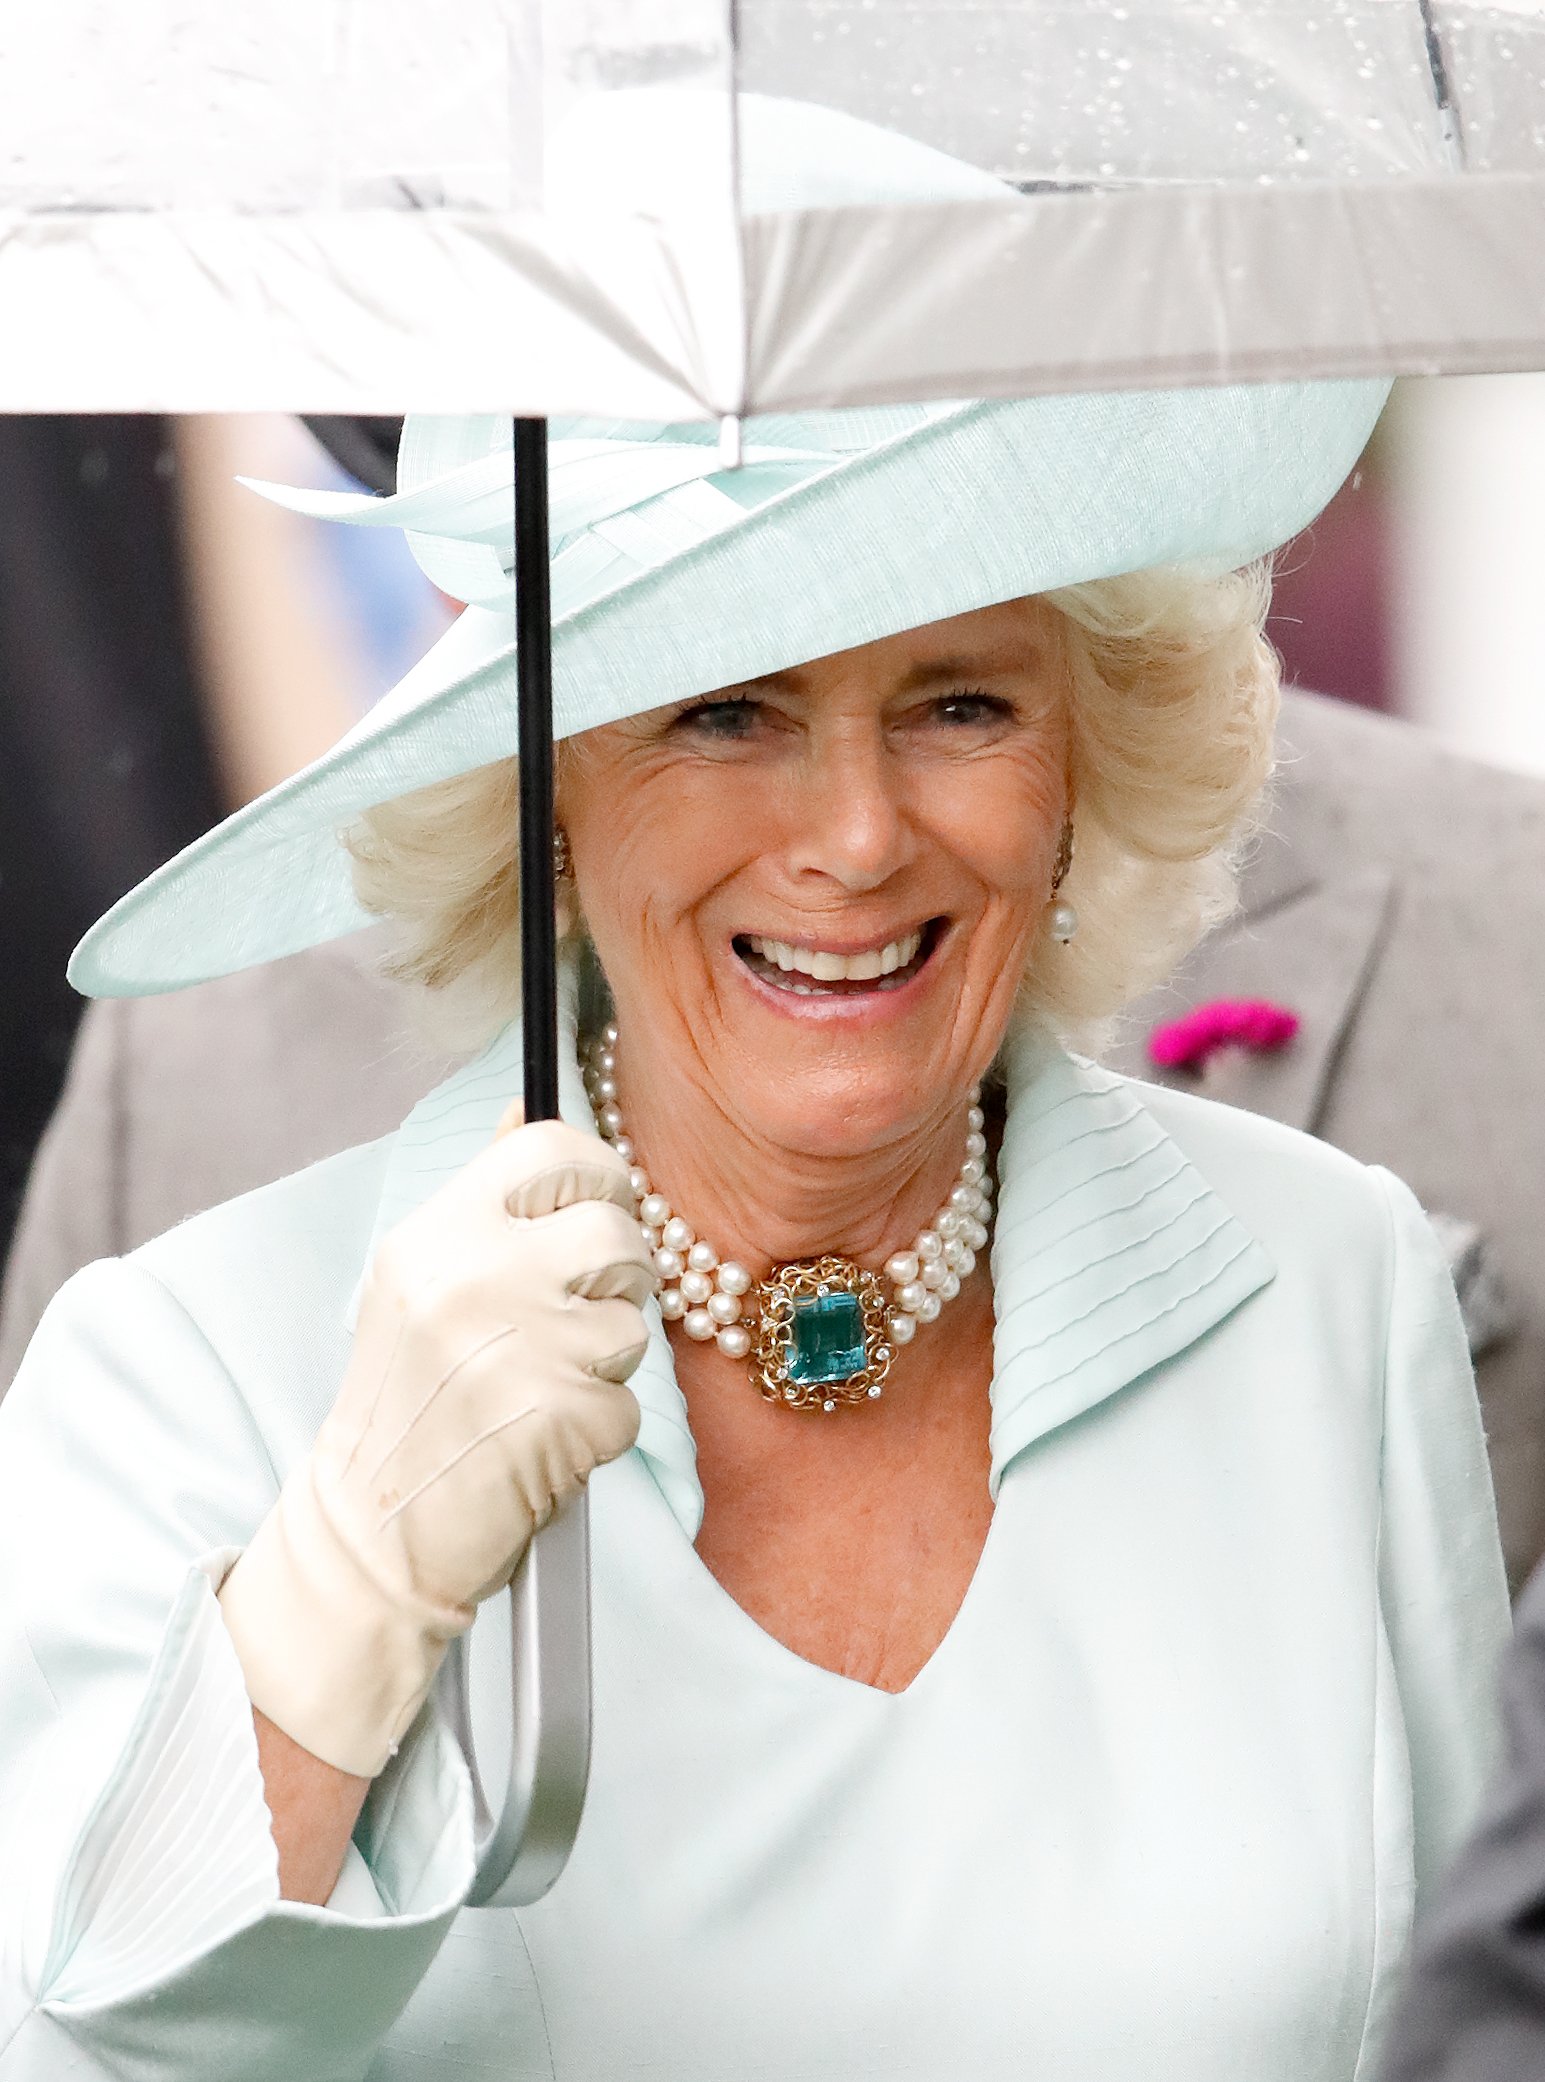 Camilla, Duchess of Cornwall, covers herself with an umbrella as she attends day two of Royal Ascot at Ascot Racecourse on June 19, 2019, in Ascot, England. | Source: Getty Images